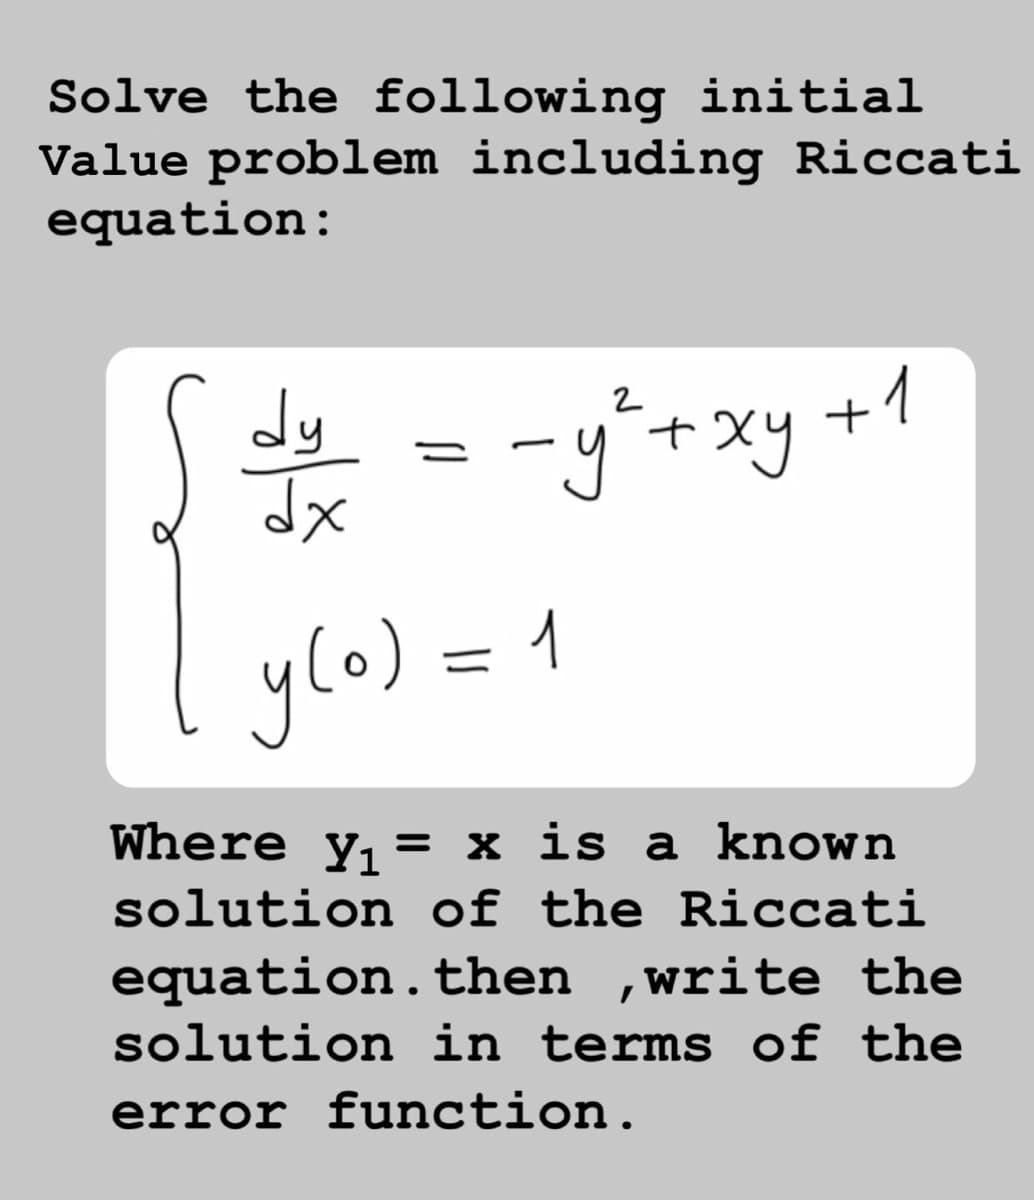 Solve the following initial
Value problem including Riccati
equation:
dy
-y+xy +1
2
ylo) = 1
Where y, = x is a known
solution of the Riccati
equation. then
solution in terms of the
,write the
error function.
